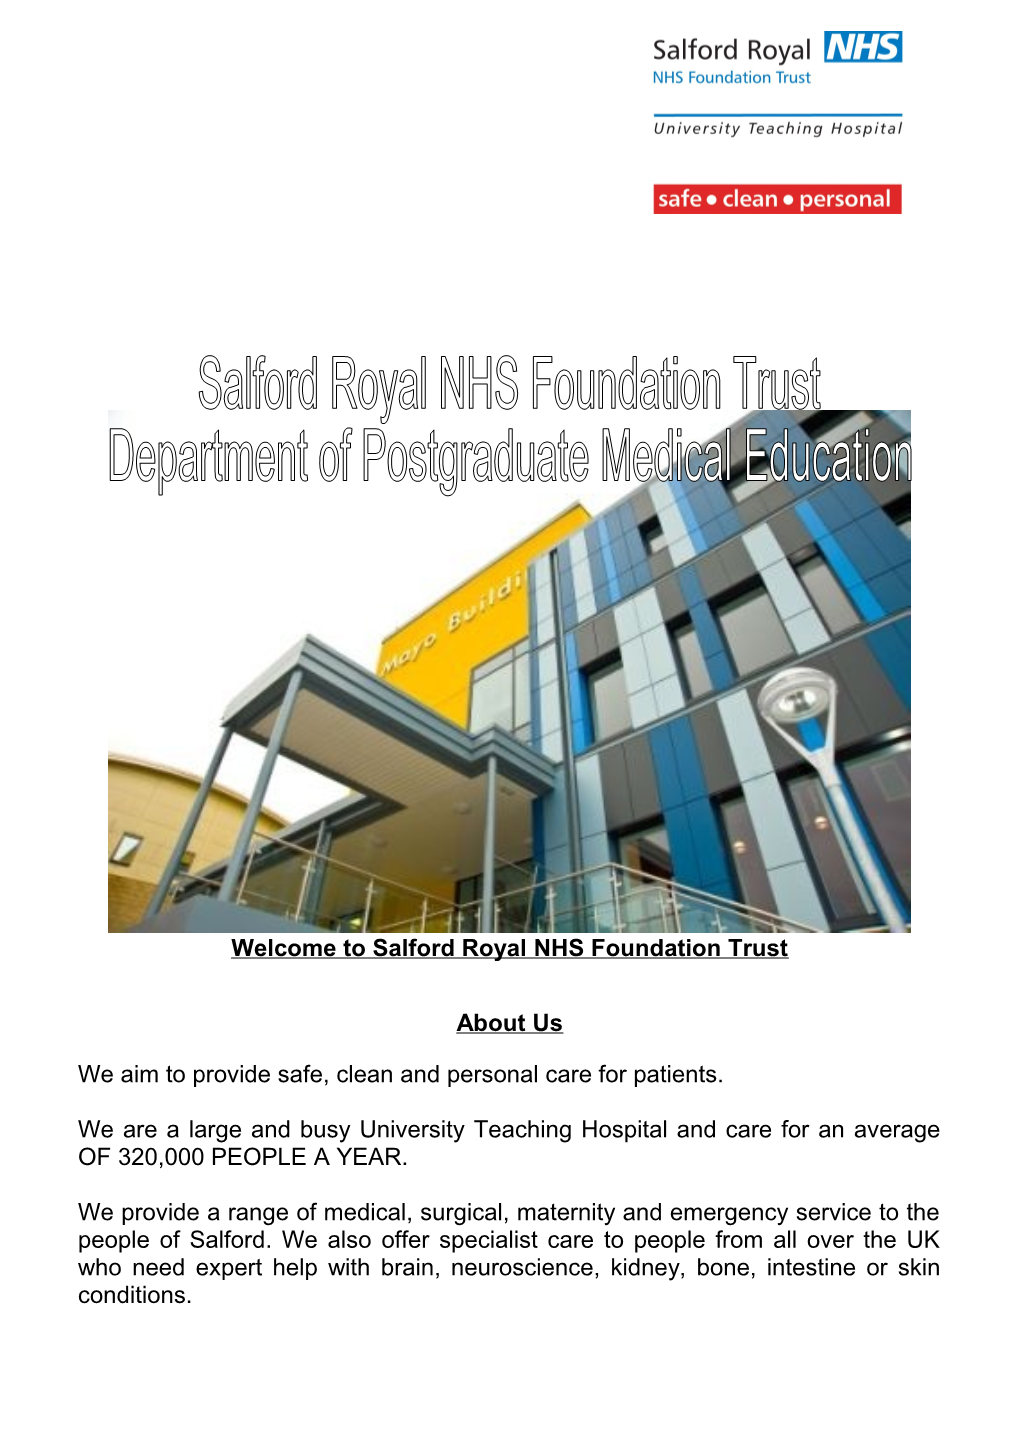 Welcome to Salford Royal NHS Foundation Trust